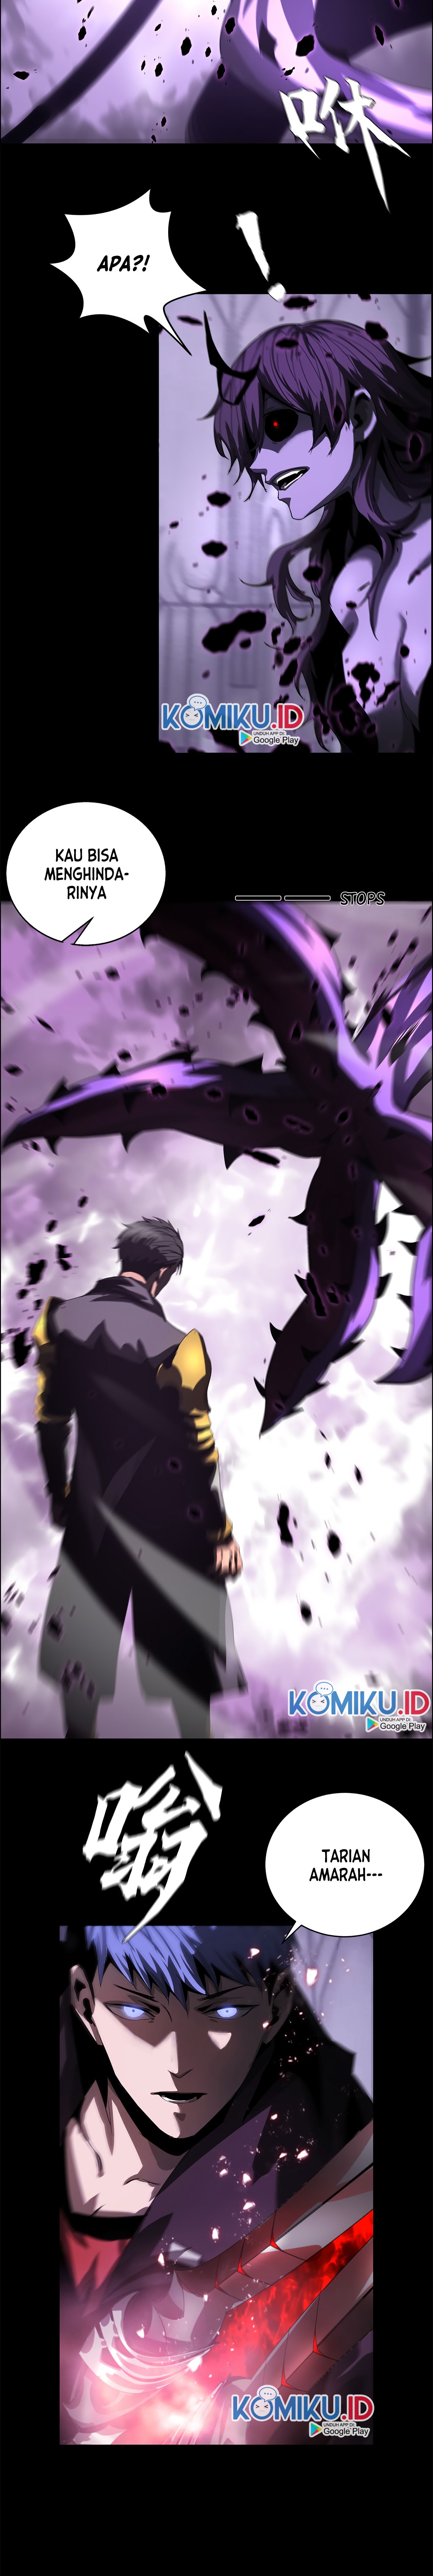 The Blade of Evolution Chapter 44 12